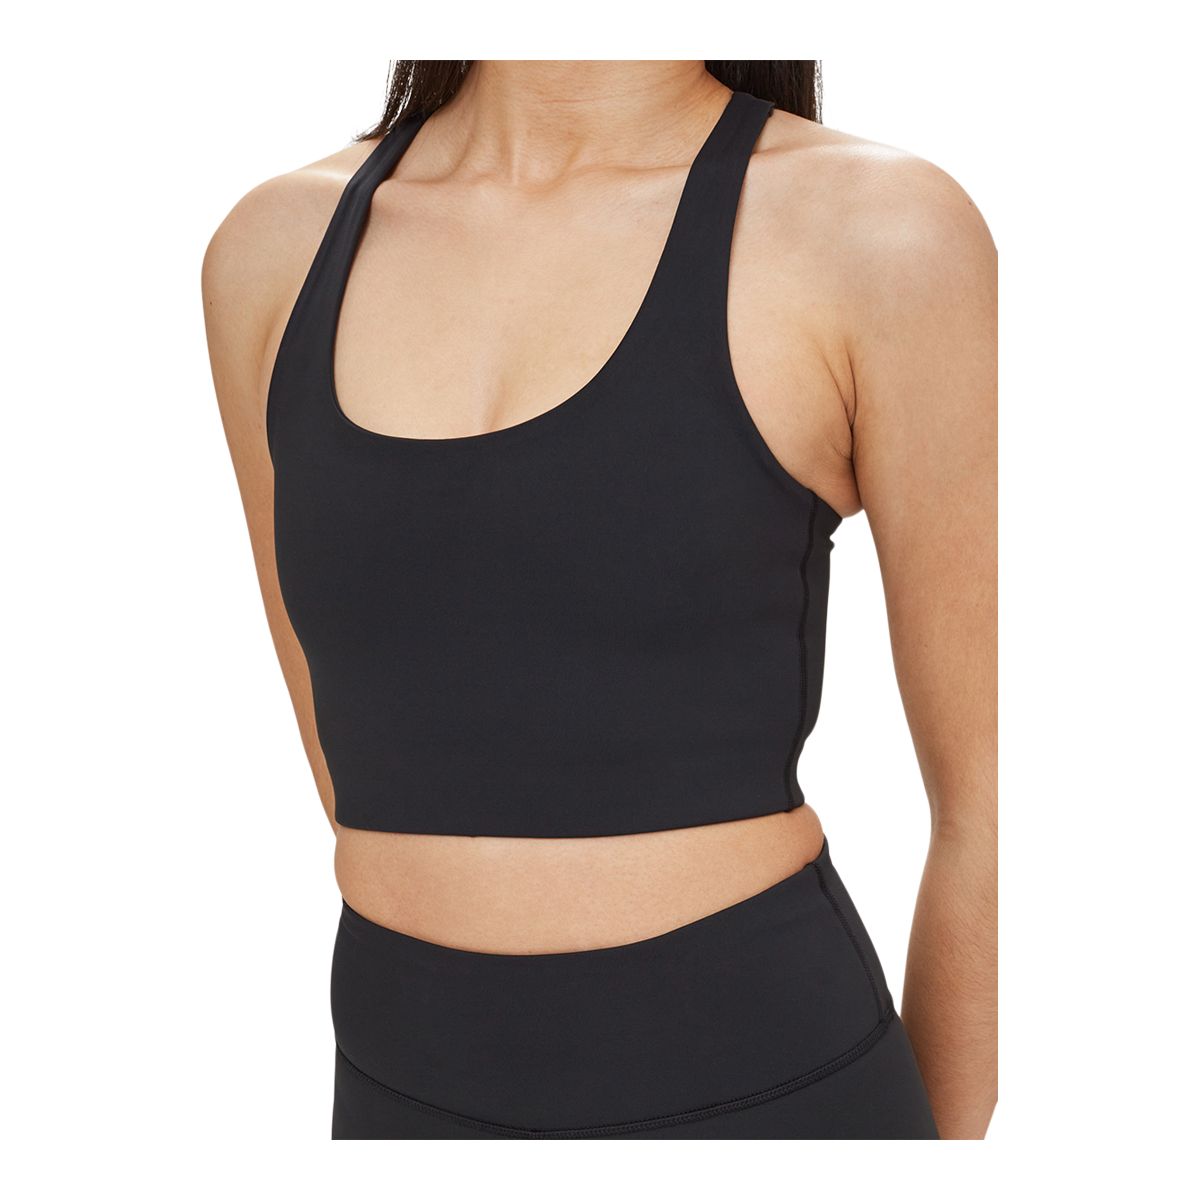 https://media-www.sportchek.ca/product/div-03-softgoods/dpt-70-athletic-clothing/sdpt-02-womens/334030639/tentree-women-s-inmotion-longline-active-bra-bef67a6a-446c-46f5-a8f6-900d3abc897c-jpgrendition.jpg?imdensity=1&imwidth=1244&impolicy=mZoom